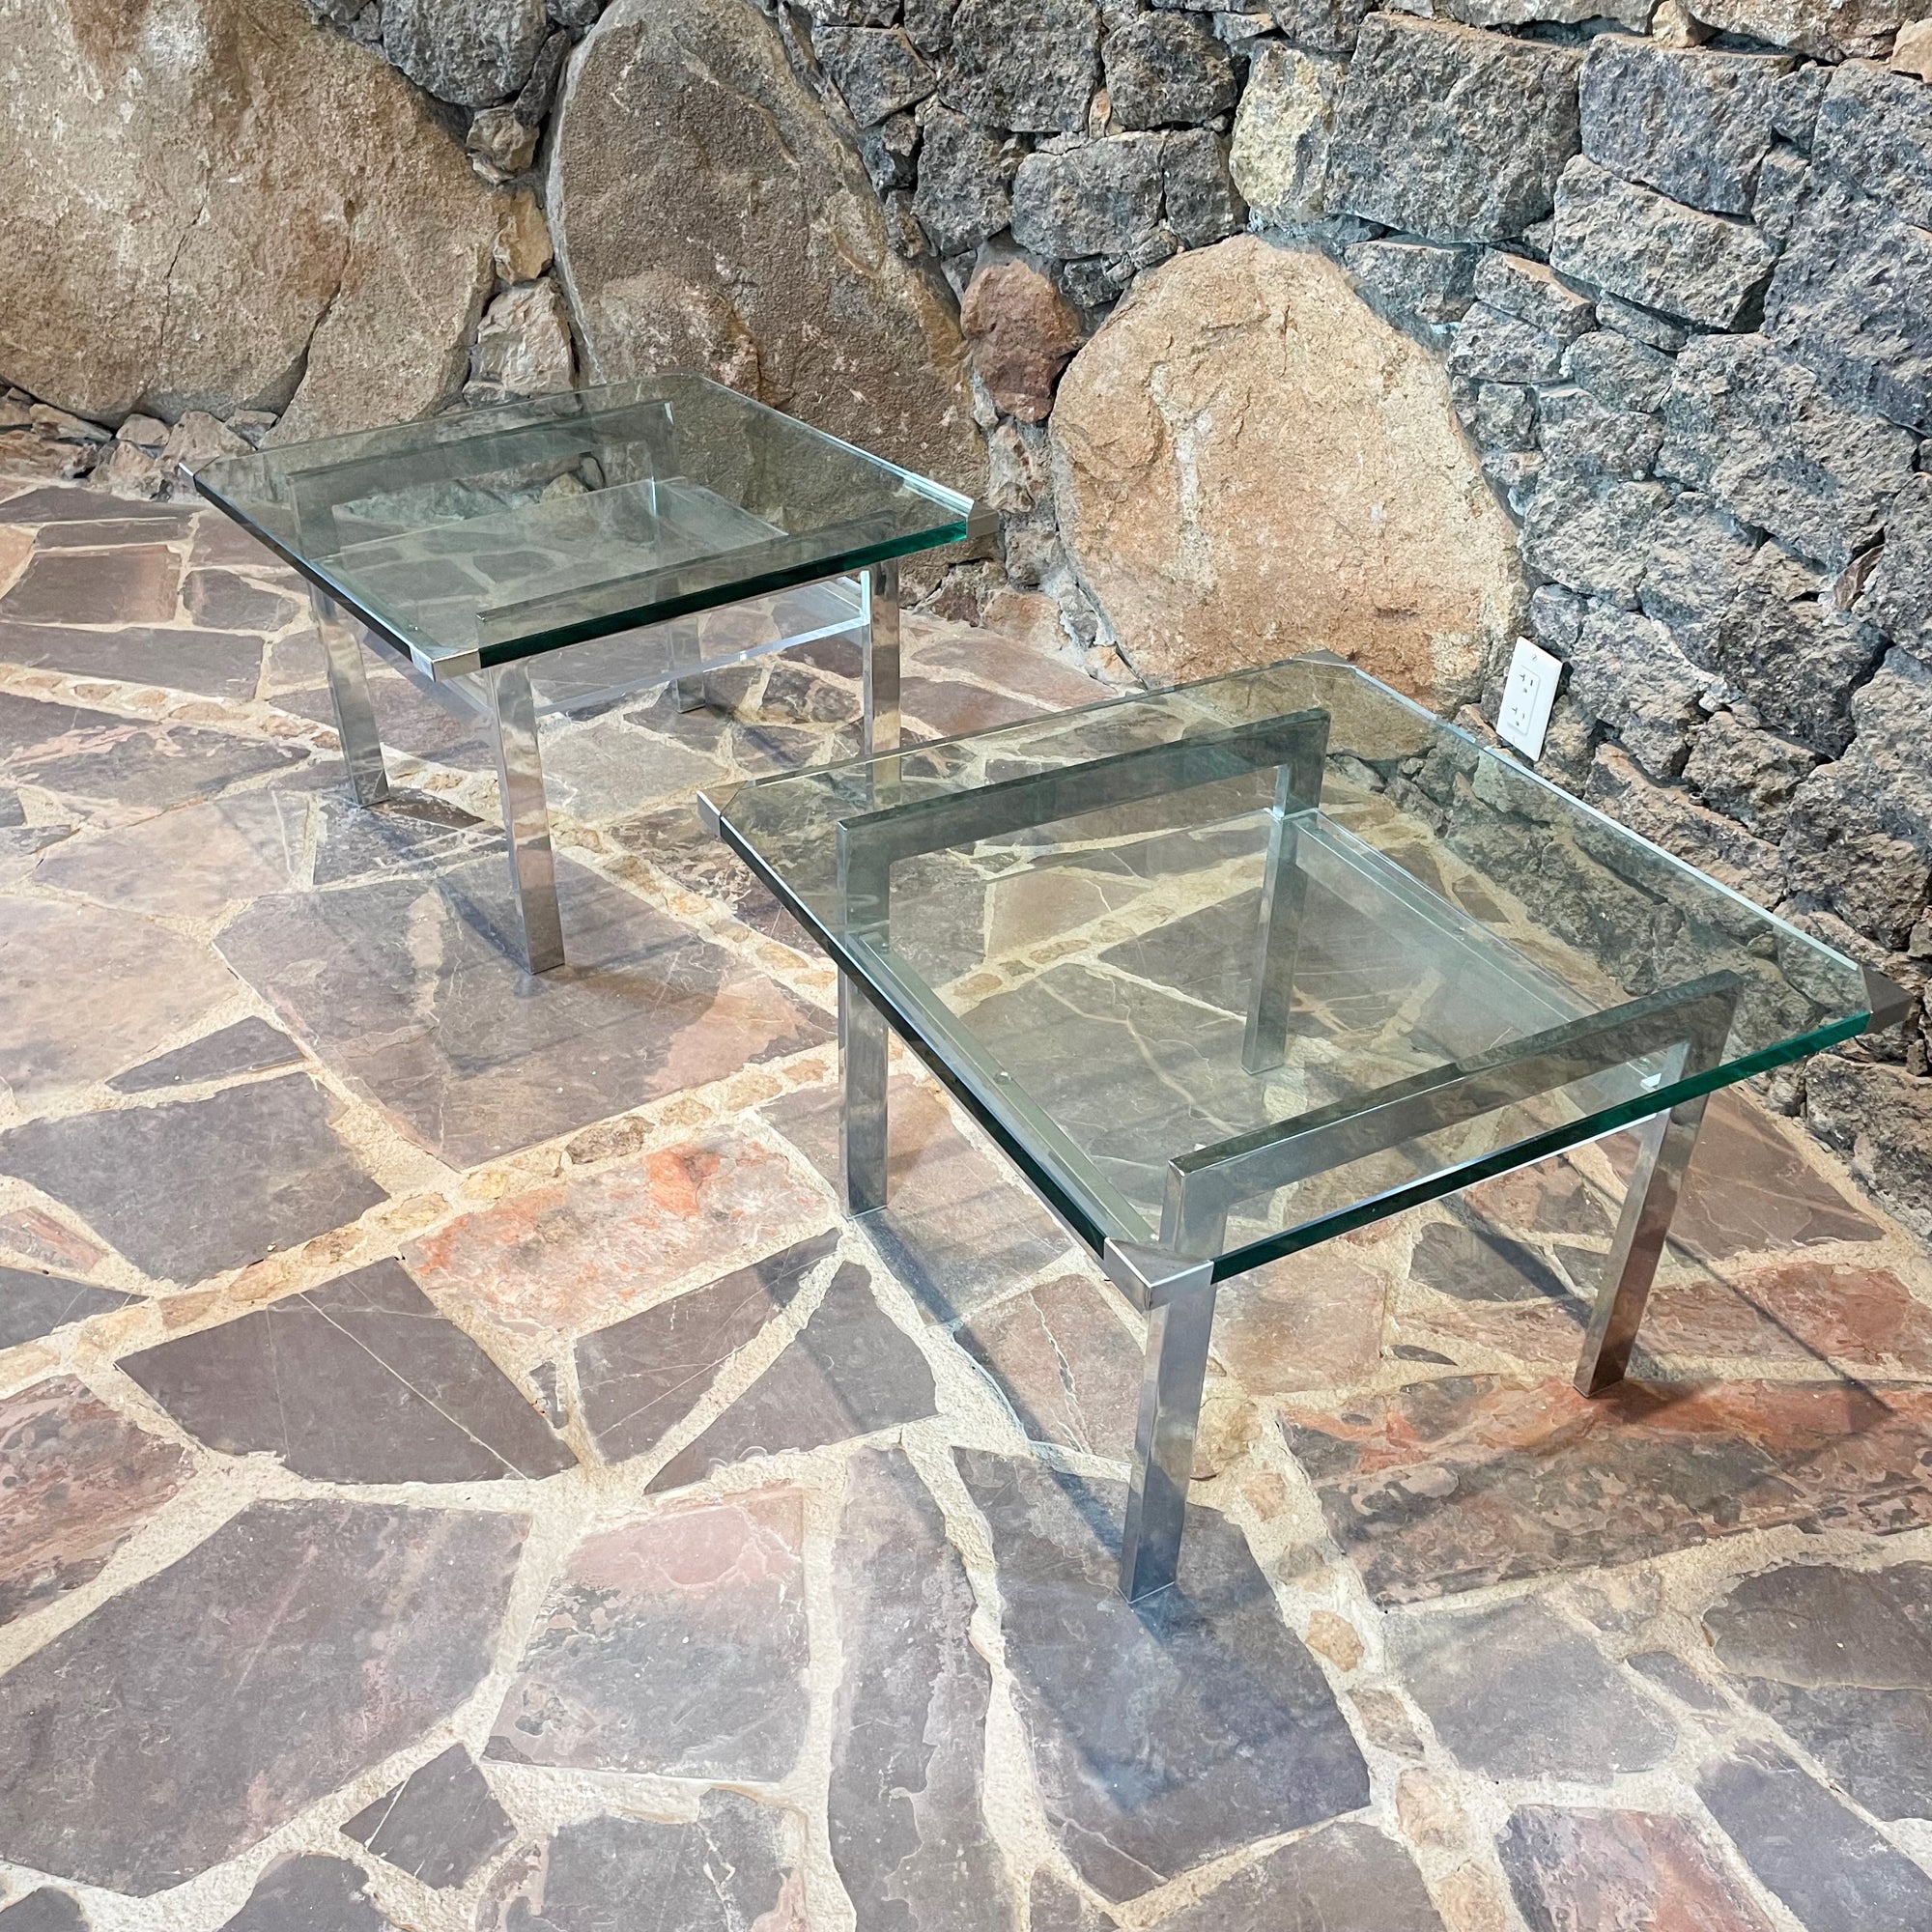 Modern side tables
Pair of clean modern side tables in chrome plated steel, thick glass and lucite.
Unmarked attributed to Milo Baughman.
Measures: 14.38 H x 23.75 x 24 glass .75 thick
Original preowned unrestored vintage condition.
Refer to